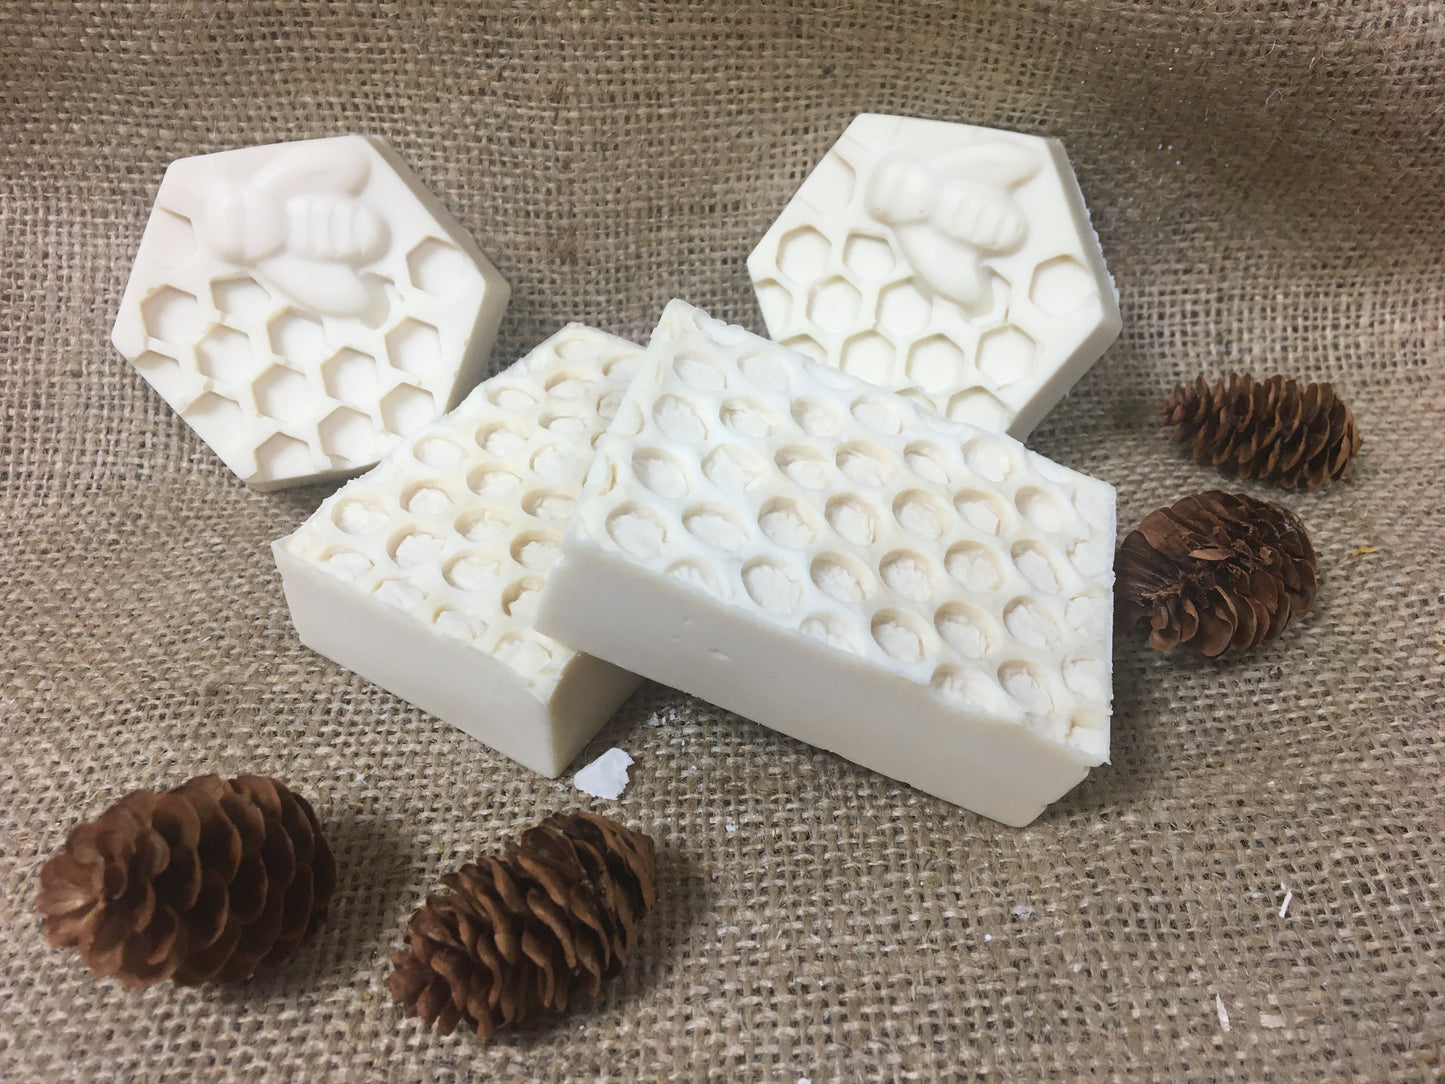  Beeswax and Honey Soap 55 g and 85 g bars